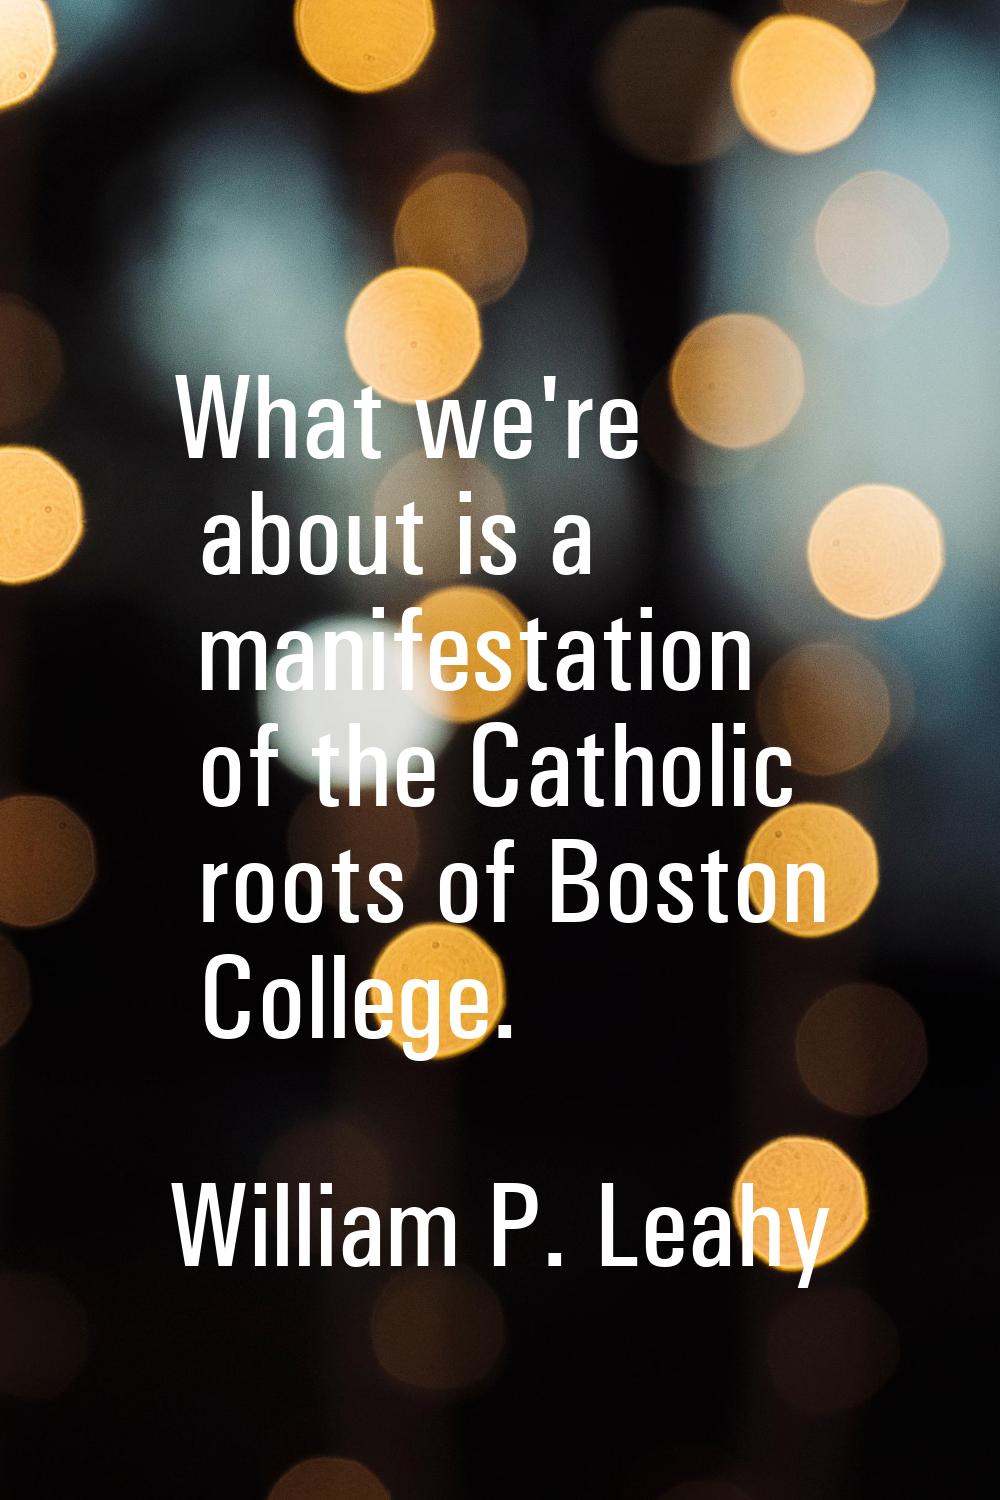 What we're about is a manifestation of the Catholic roots of Boston College.